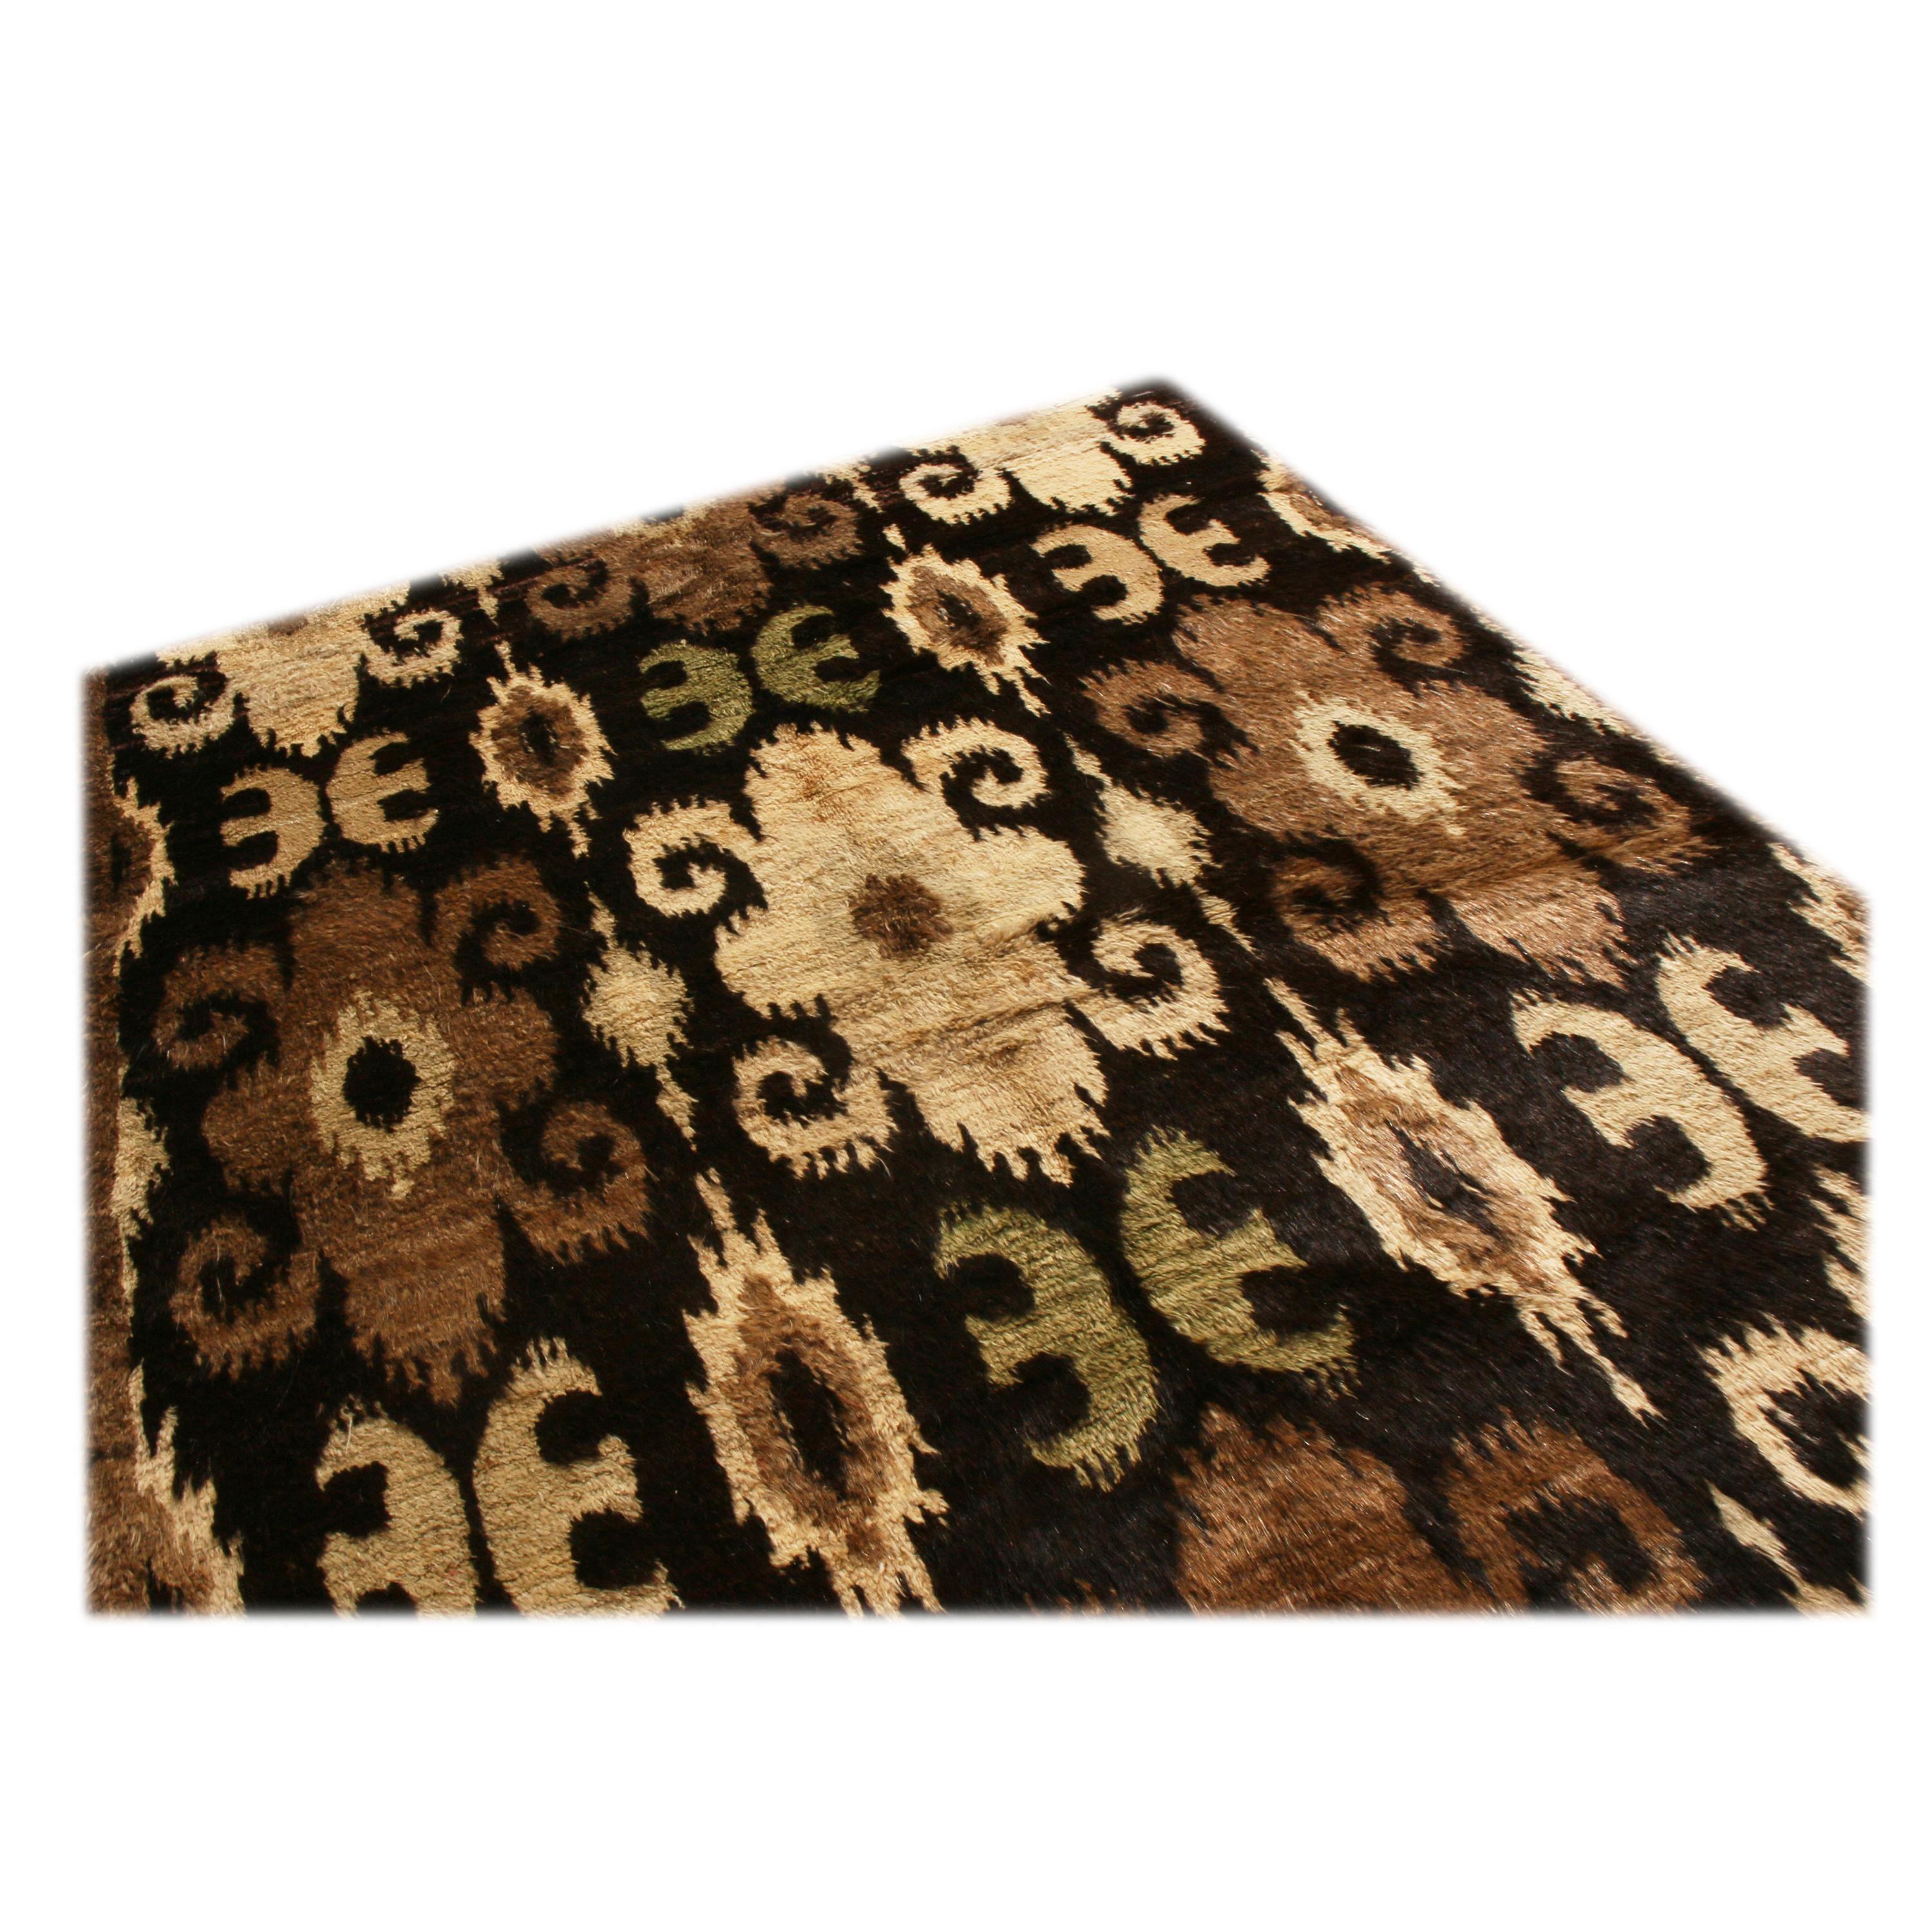 Originating from Afghanistan, this new Afghan wool rug is hand knotted in a thick, high-quality wool pile with a smoothness like that of goat hair. A deep black background within a rich brown wrapping guard border is complemented by beige, chestnut